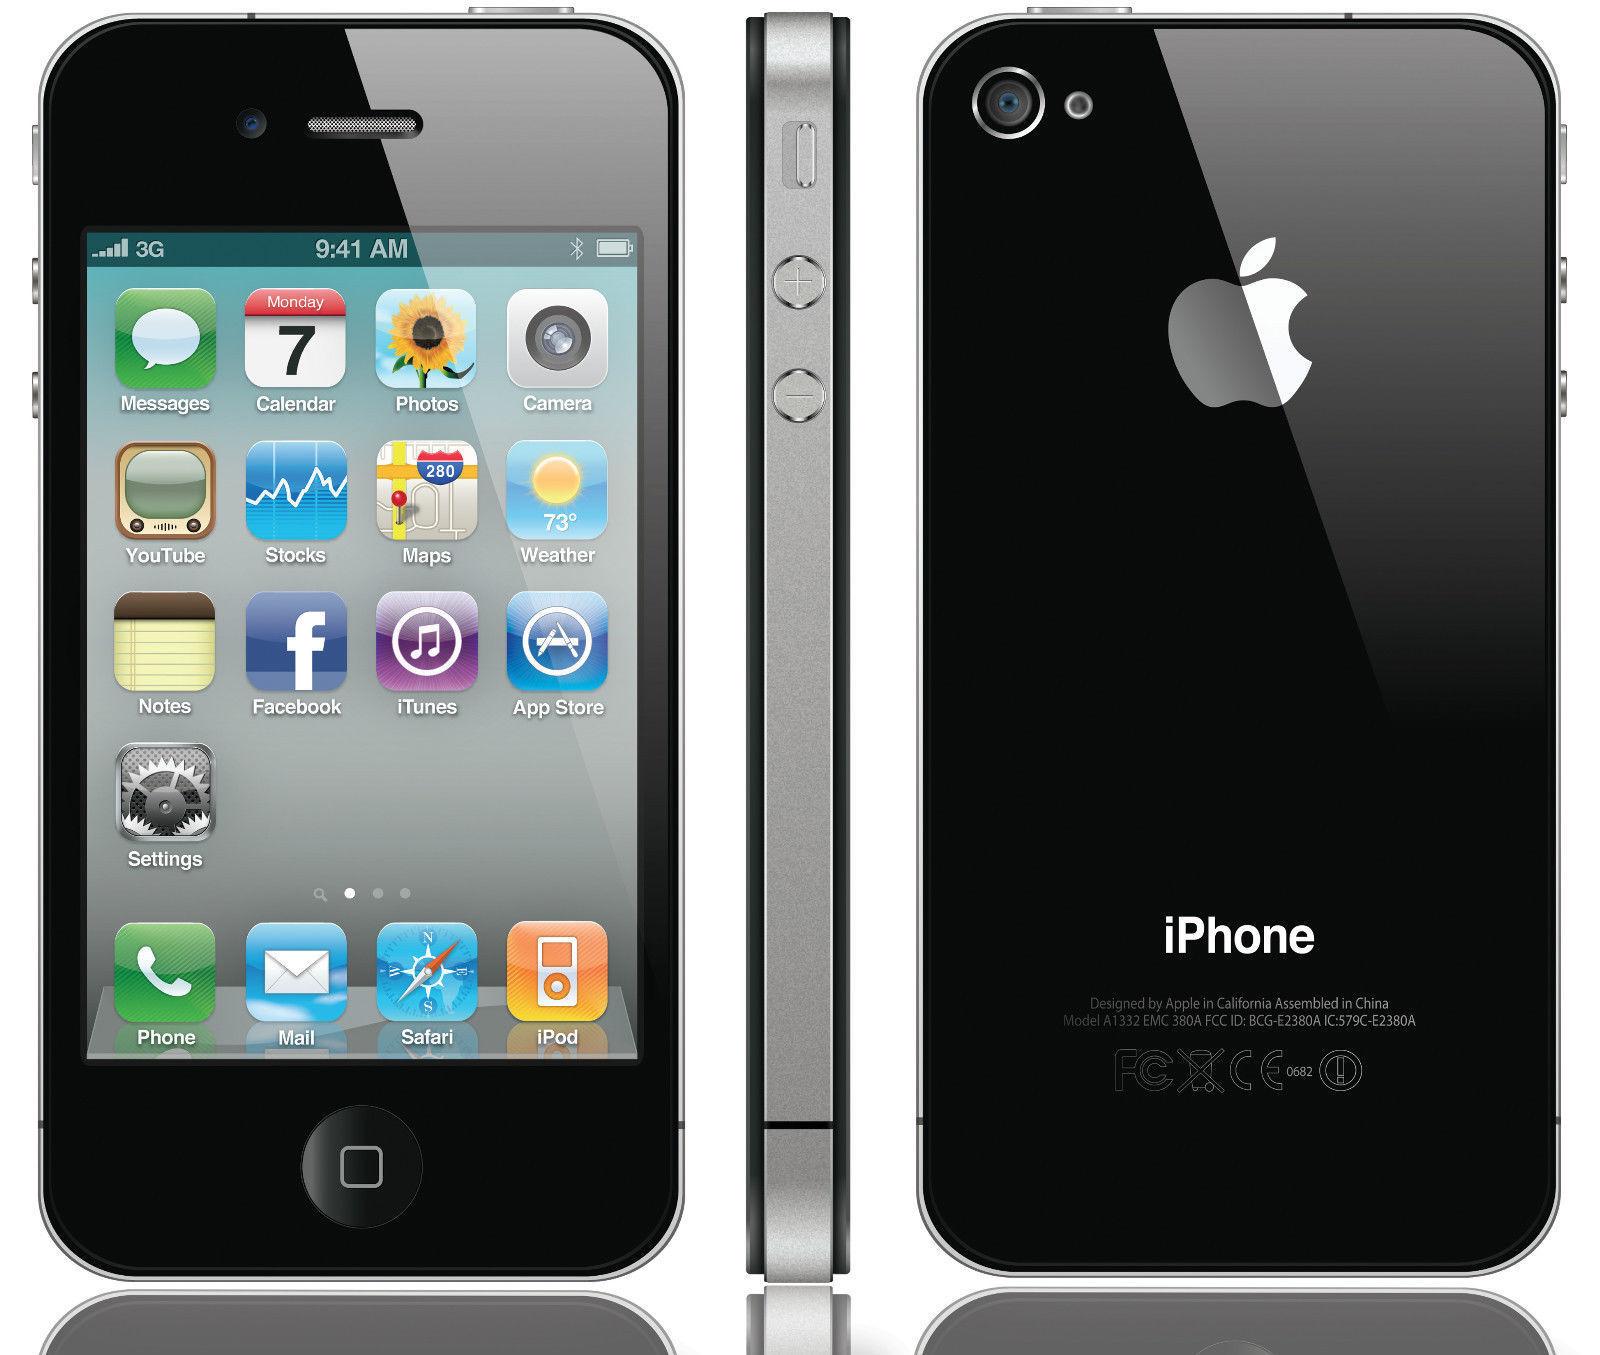 iphone 4s 16GB (Black) review and price